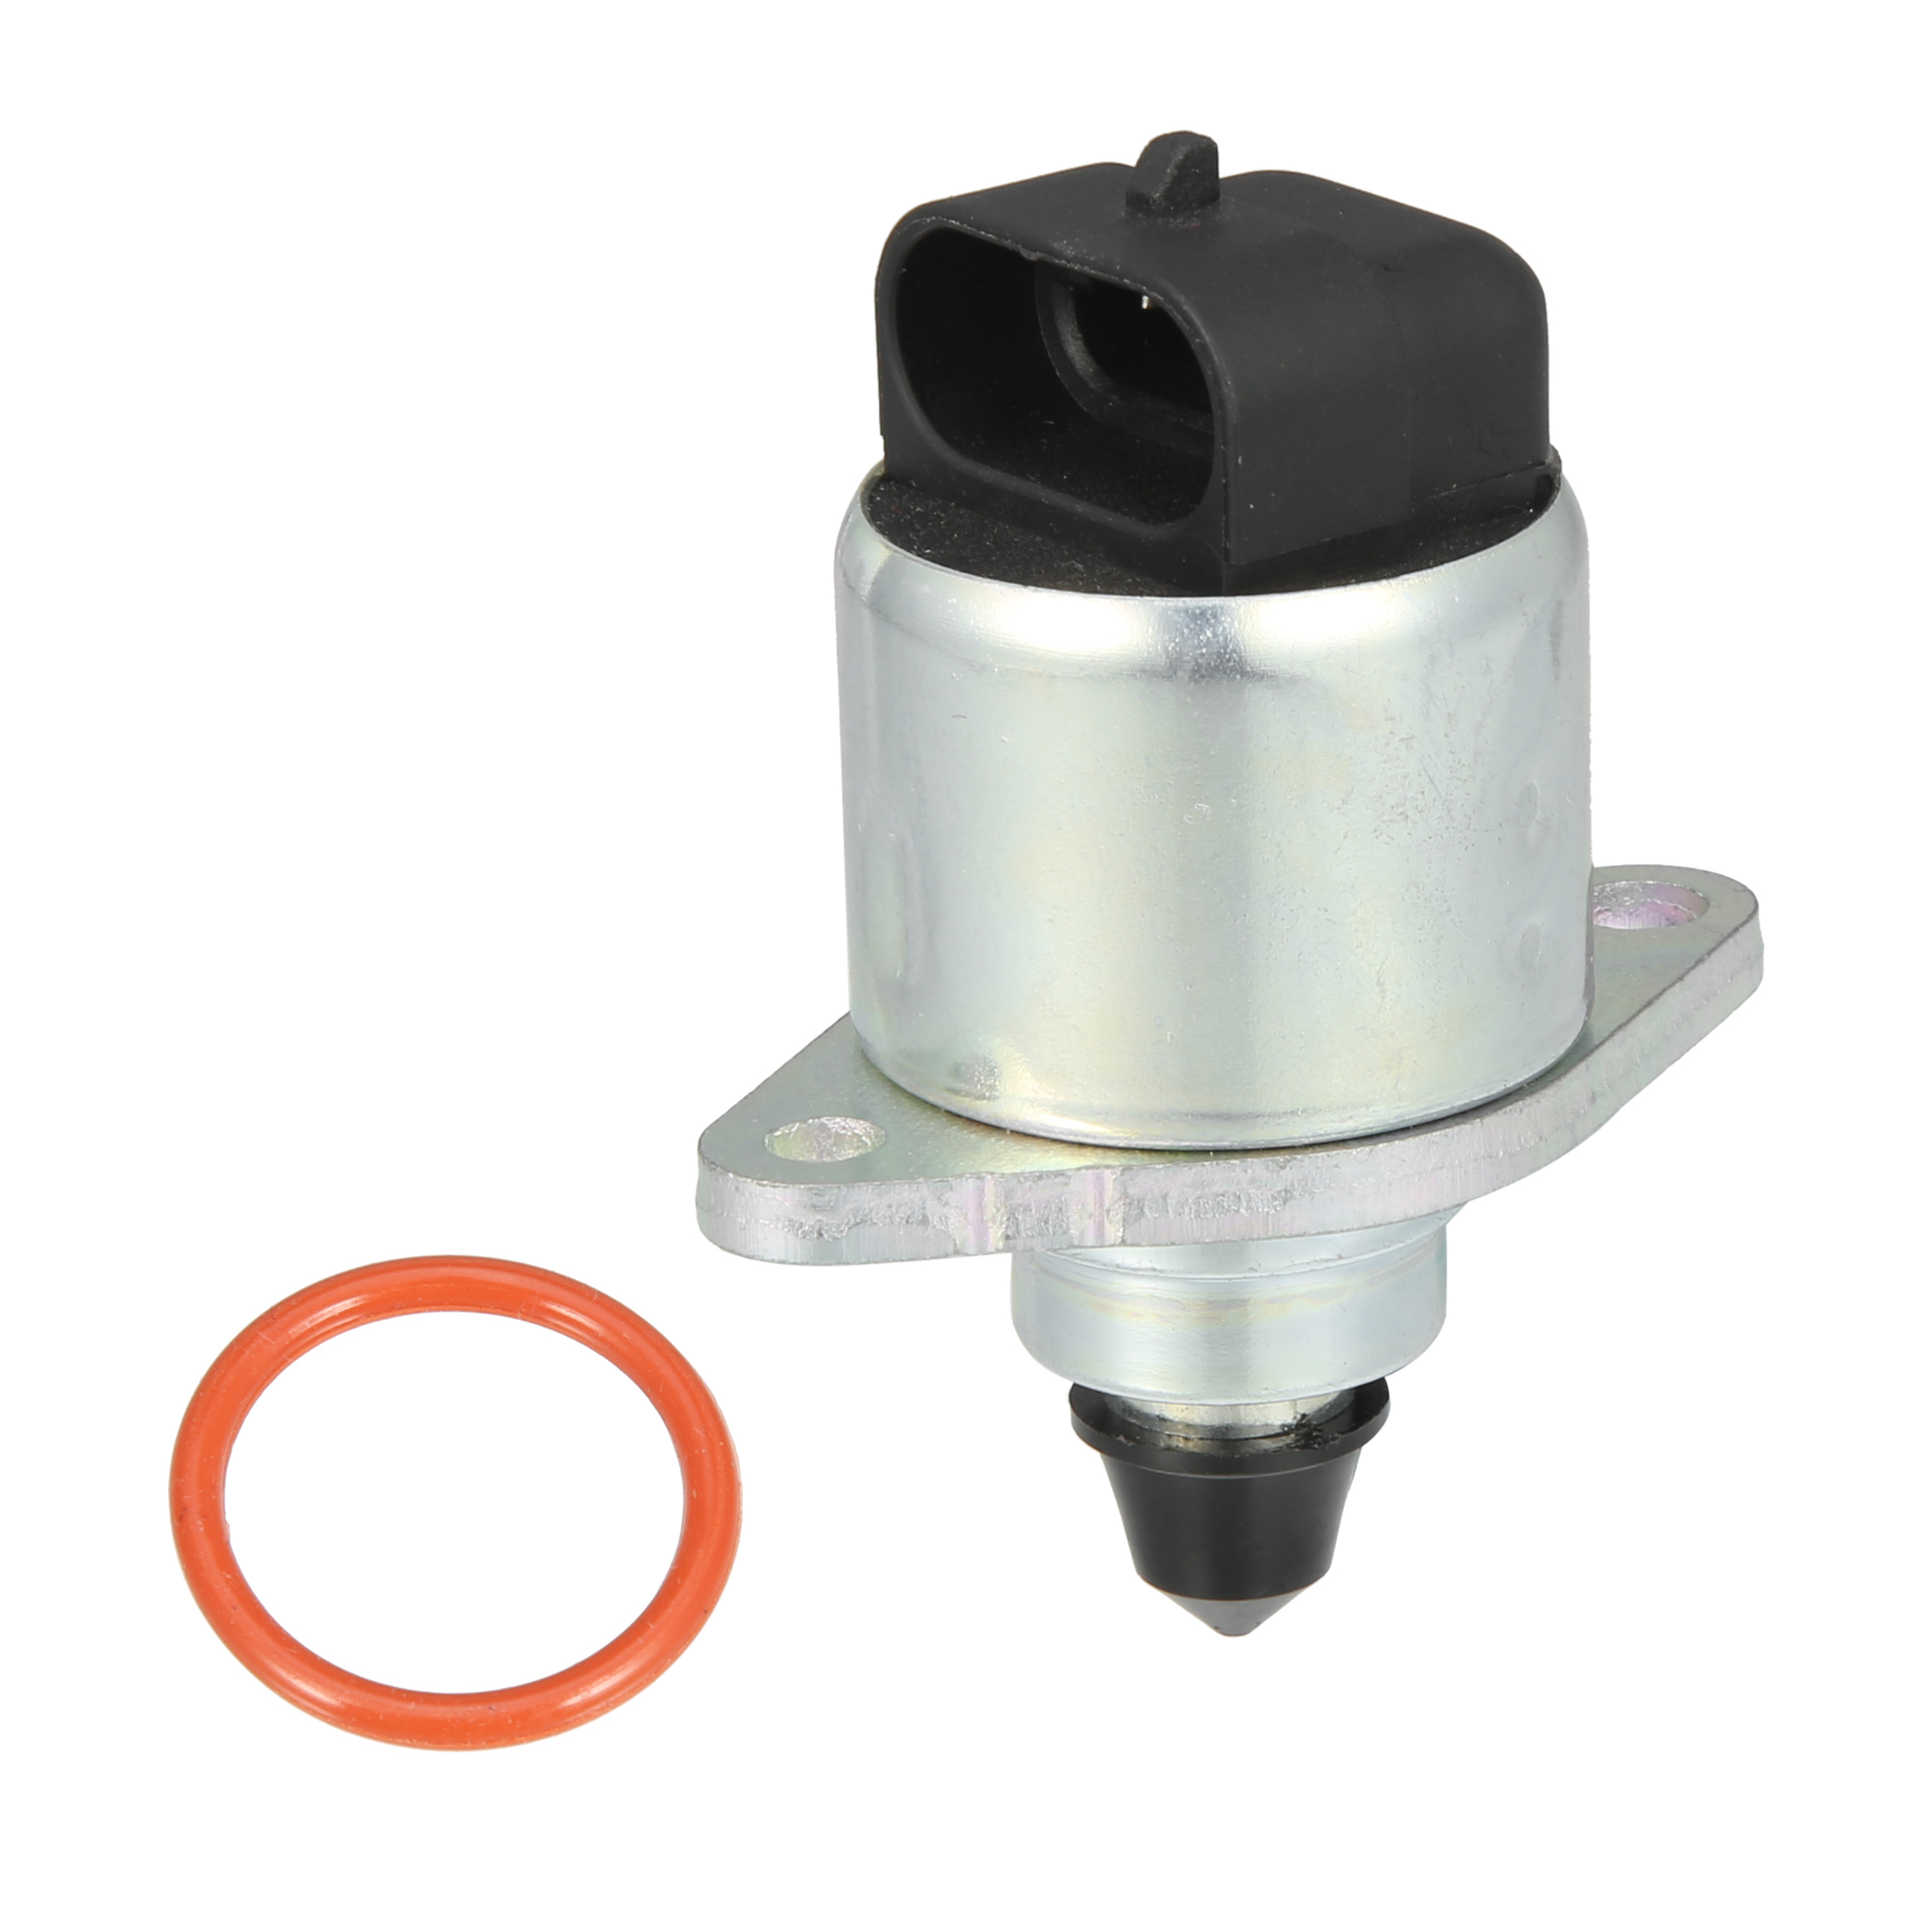 Car Idle Air Control Valve 96966721 96966710 96958412 with Gaskets for Chevy Spark M300 1.0L Silver Tone - image 1 of 6